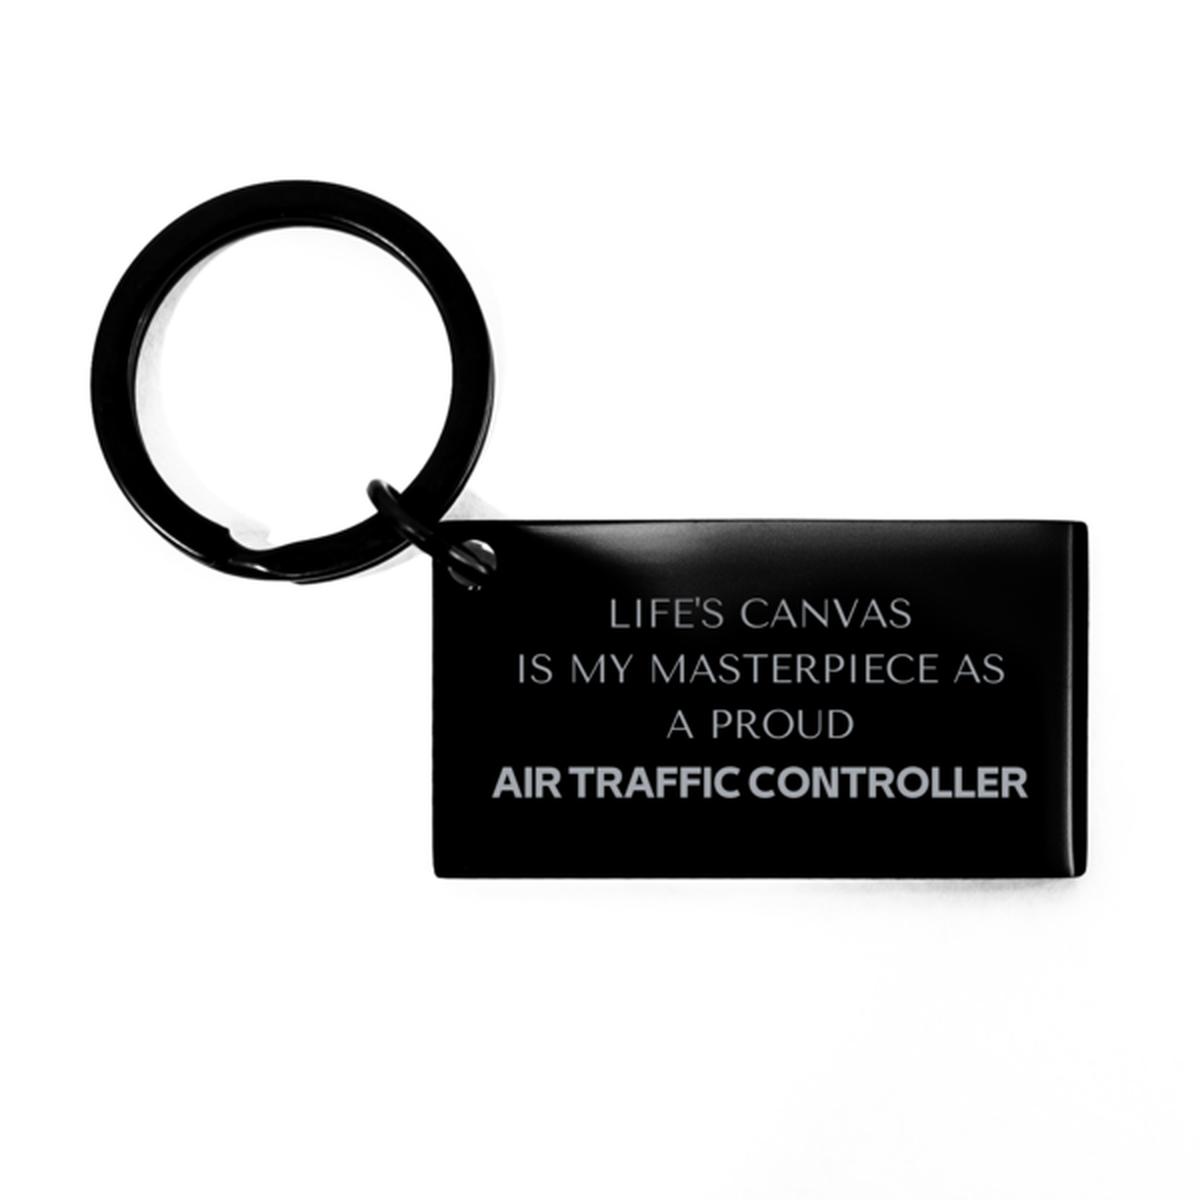 Proud Air Traffic Controller Gifts, Life's canvas is my masterpiece, Epic Birthday Christmas Unique Keychain For Air Traffic Controller, Coworkers, Men, Women, Friends